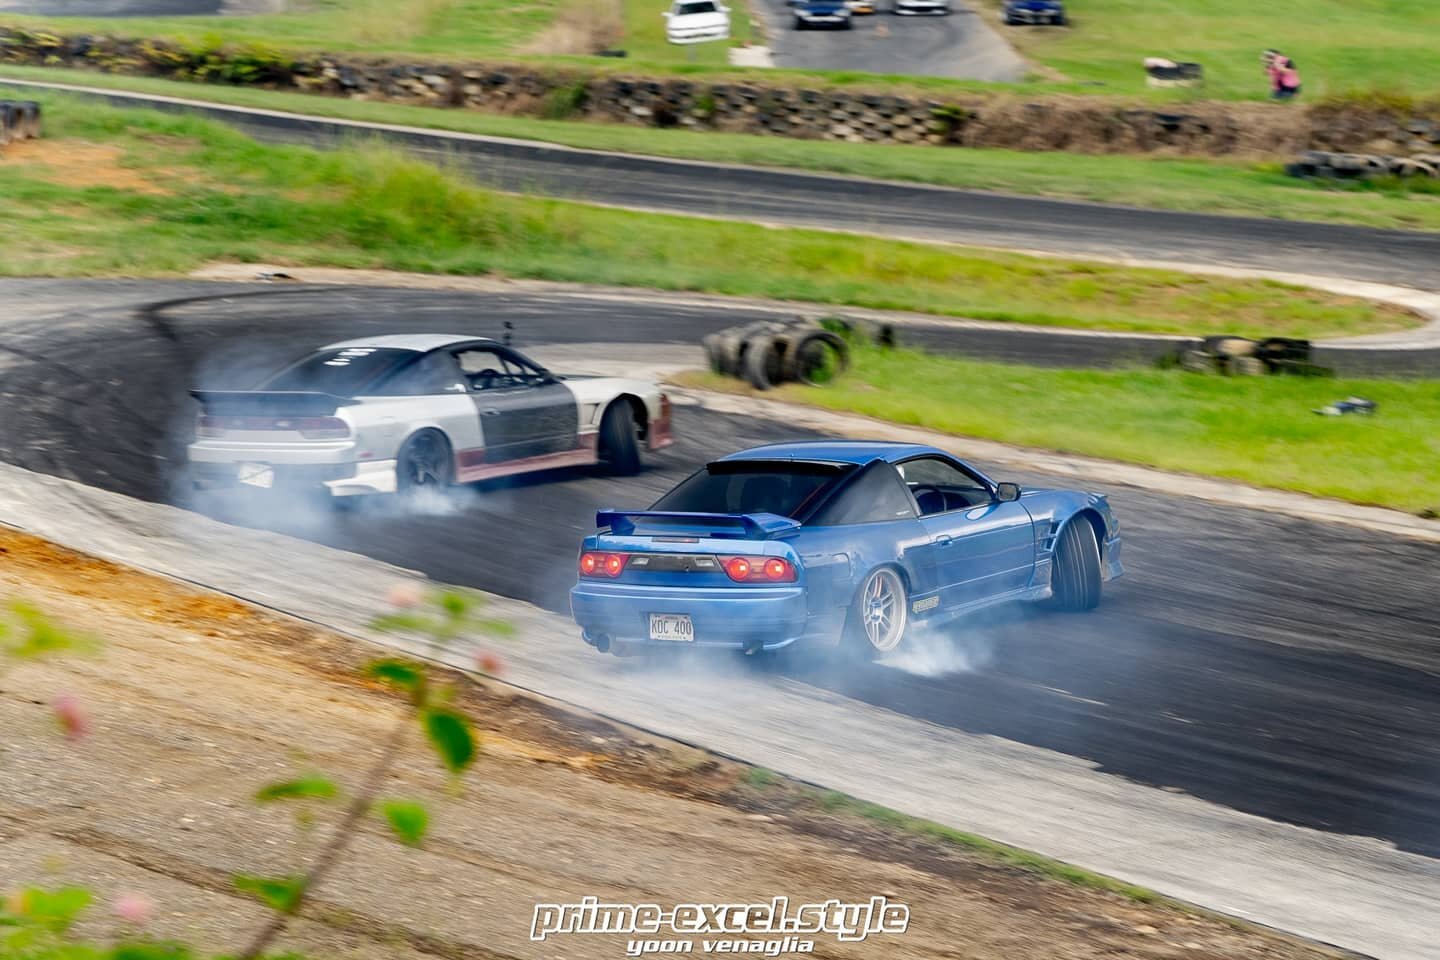 There were some really fun chase runs to watch this year at #meltdown and #thegetdown
.
.
.
.
.
#silvia #180sx #s13 #typex #drift #jzx81  #s15 #s14 #corolla #ke70